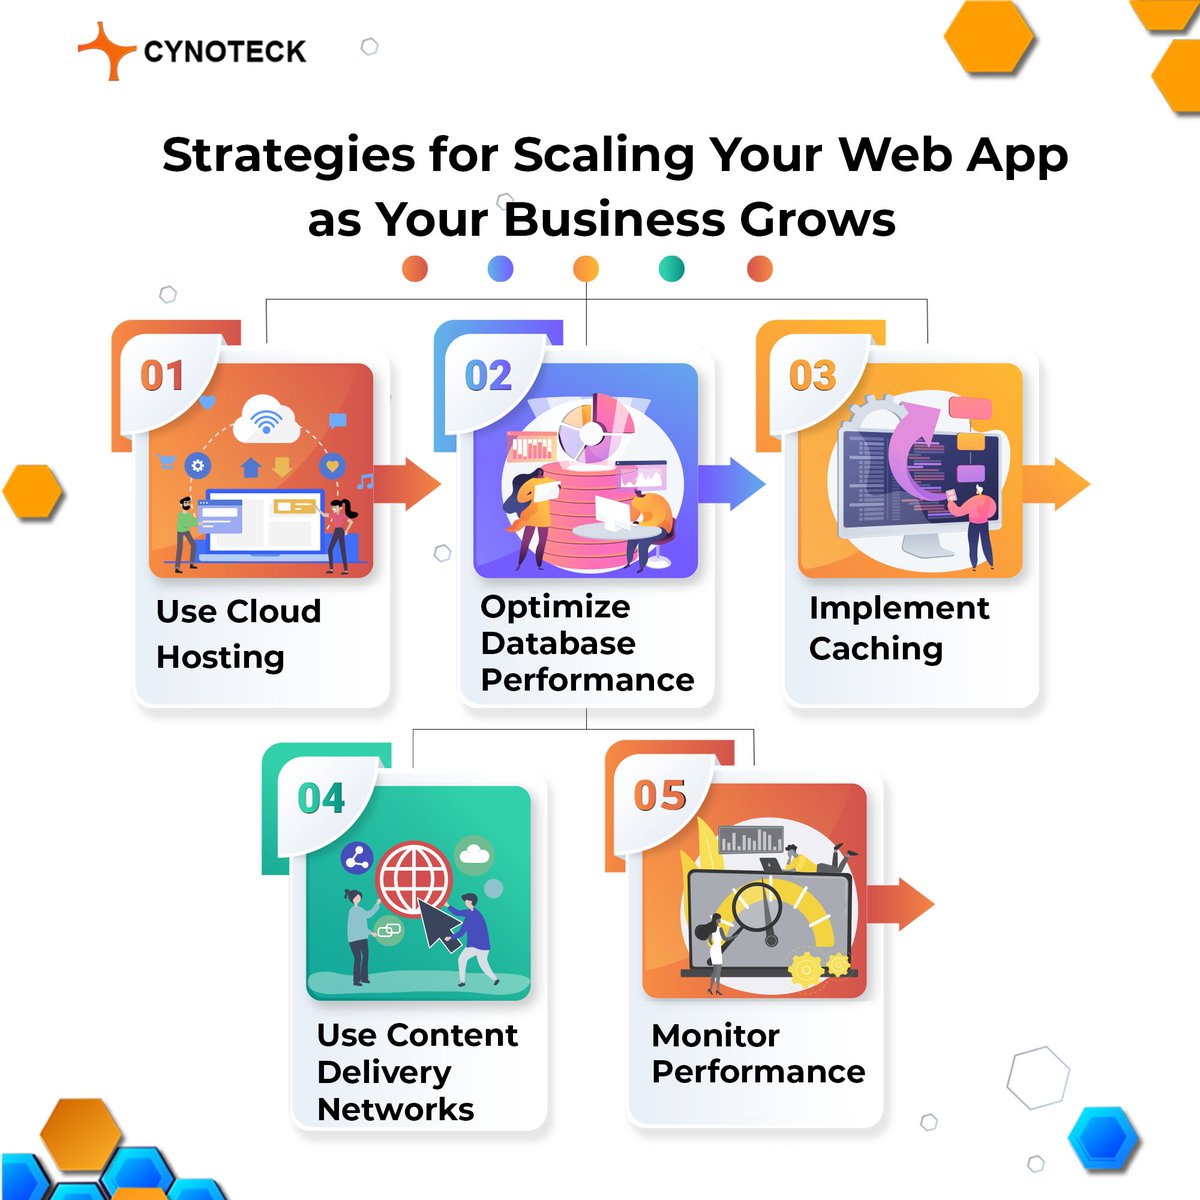 🚀 Ready to Take Your Web App to New Heights? Here are some essential strategies for scaling your business as it grows 💻✨
.
.
.
.
#Cynoteck #ScalingStrategies #WebAppGrowth #CloudHosting #DatabaseOptimization #CachingTechniques #TechTips